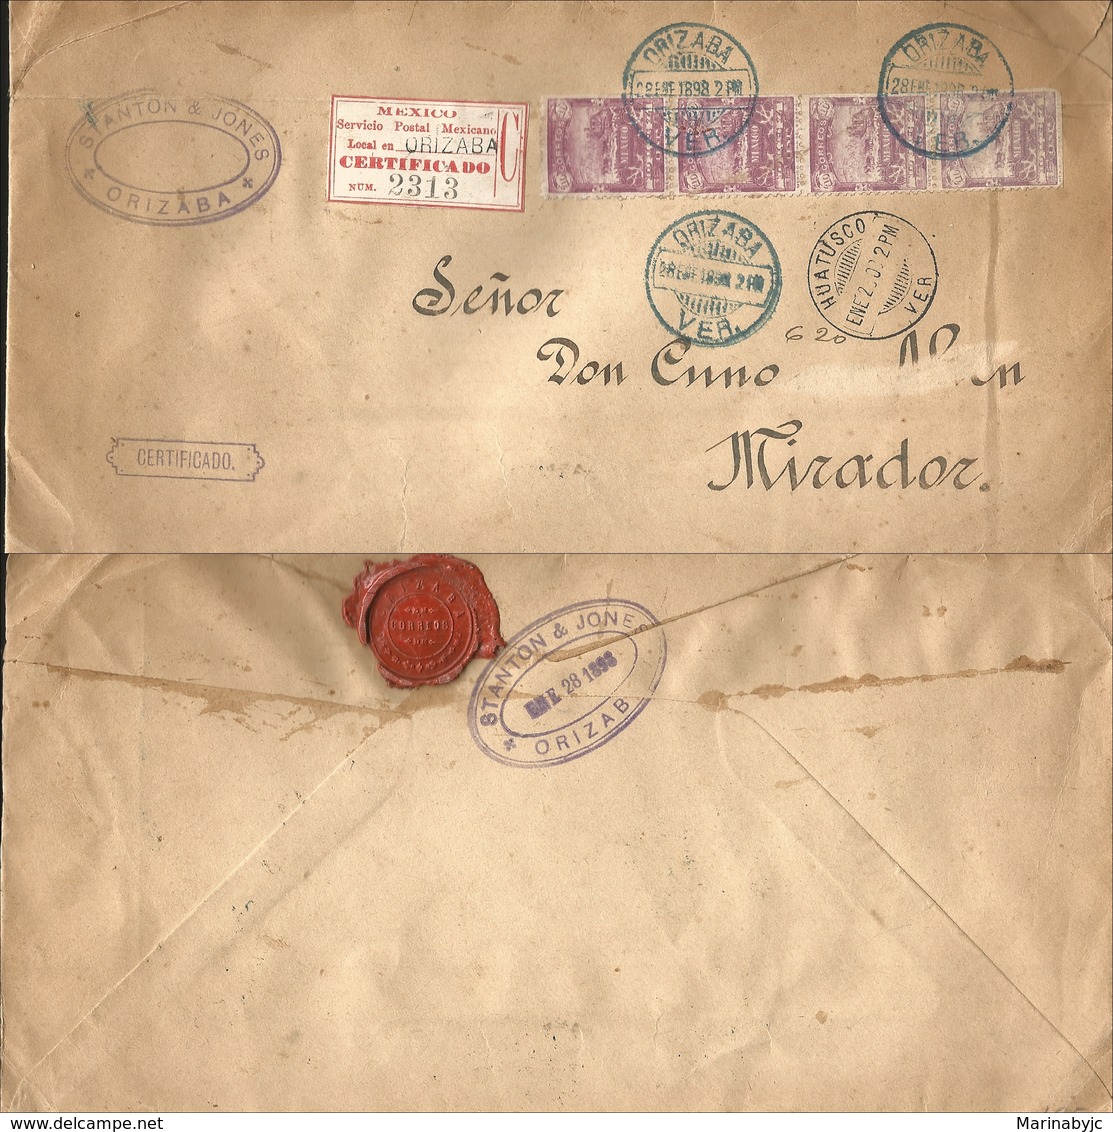 J) 1898 MEXICO, MAIL COACH, STRIP OF 4, CERTIFICATED, MULTIPLE STAMPS, AIRMAIL, CIRCULATED COVER, FROM MEXICO TO VERACRU - Mexico